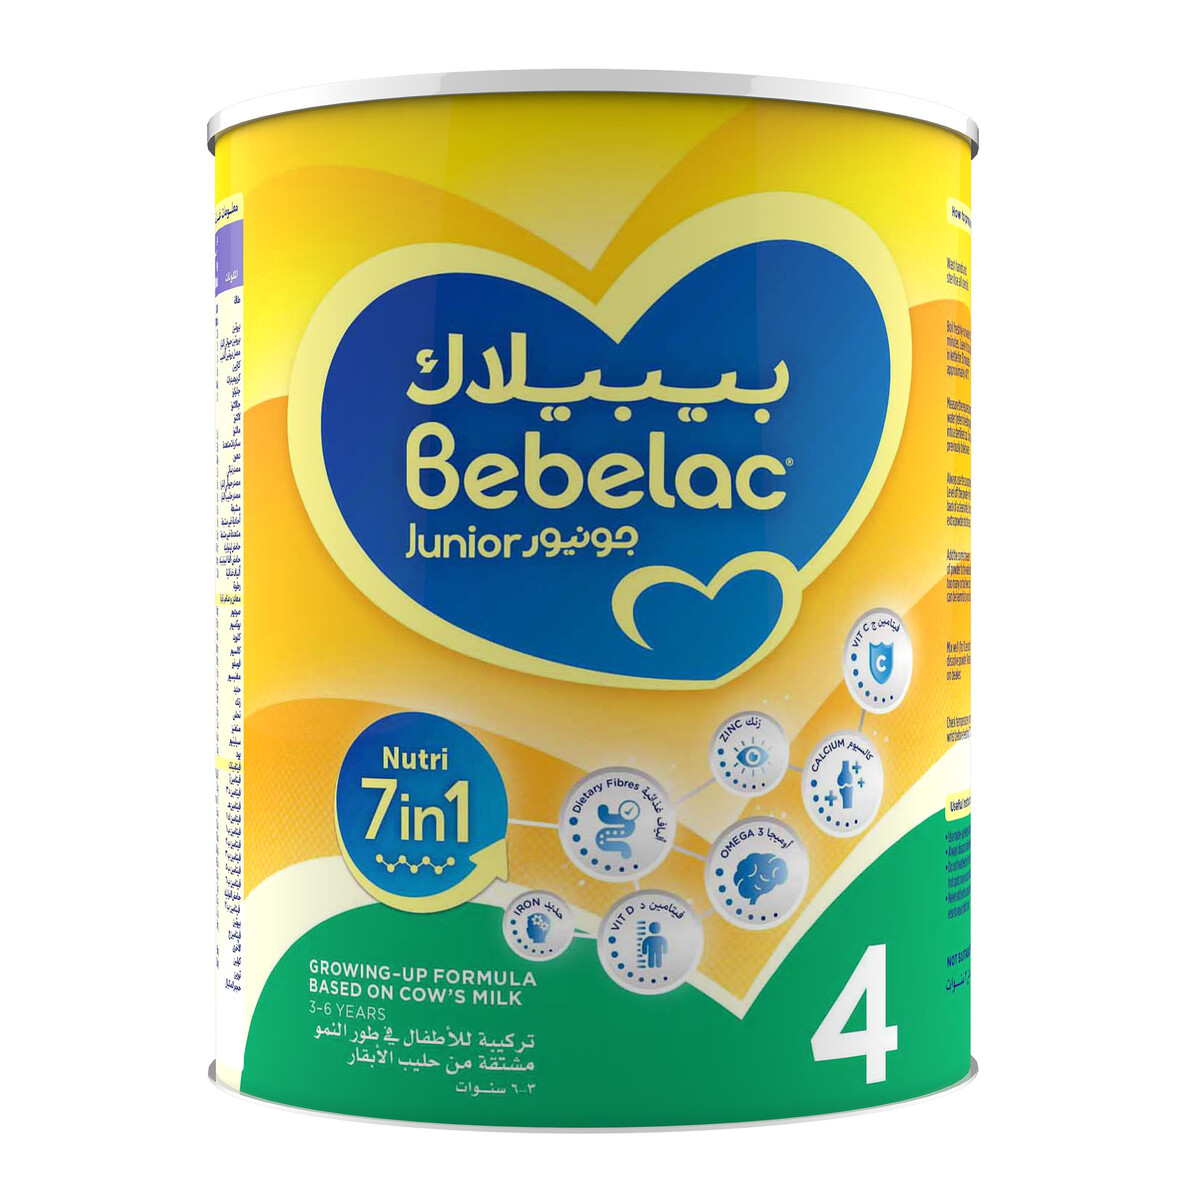 Bebelac Junior Nutri 7in1 Growing Up Formula Stage 4 From 3 to 6 Years 800g